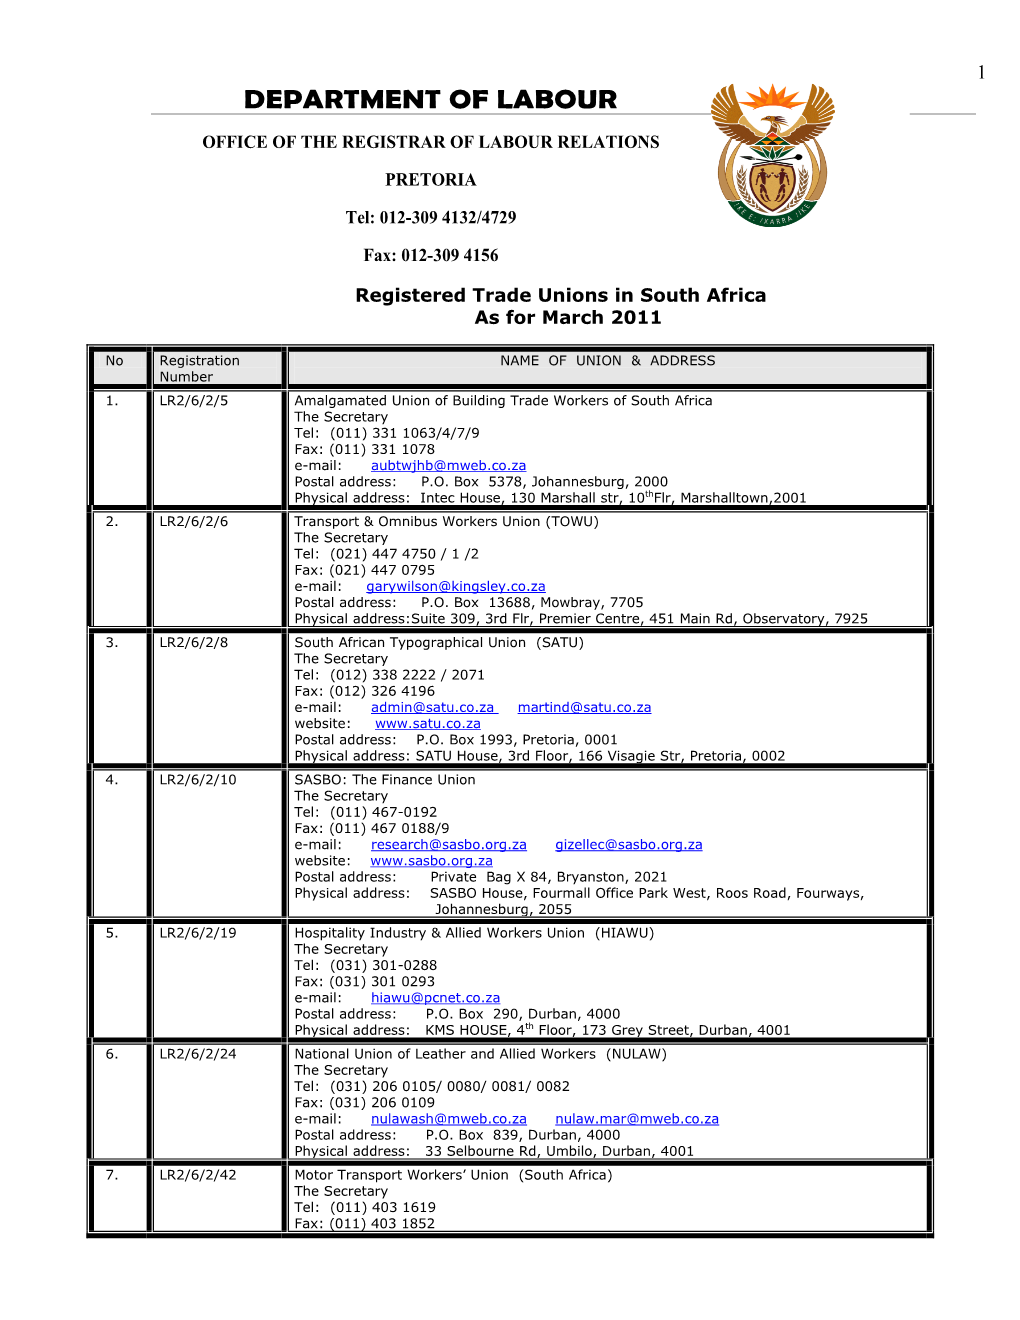 Registered Trade Unions in South Africa As for March 2011